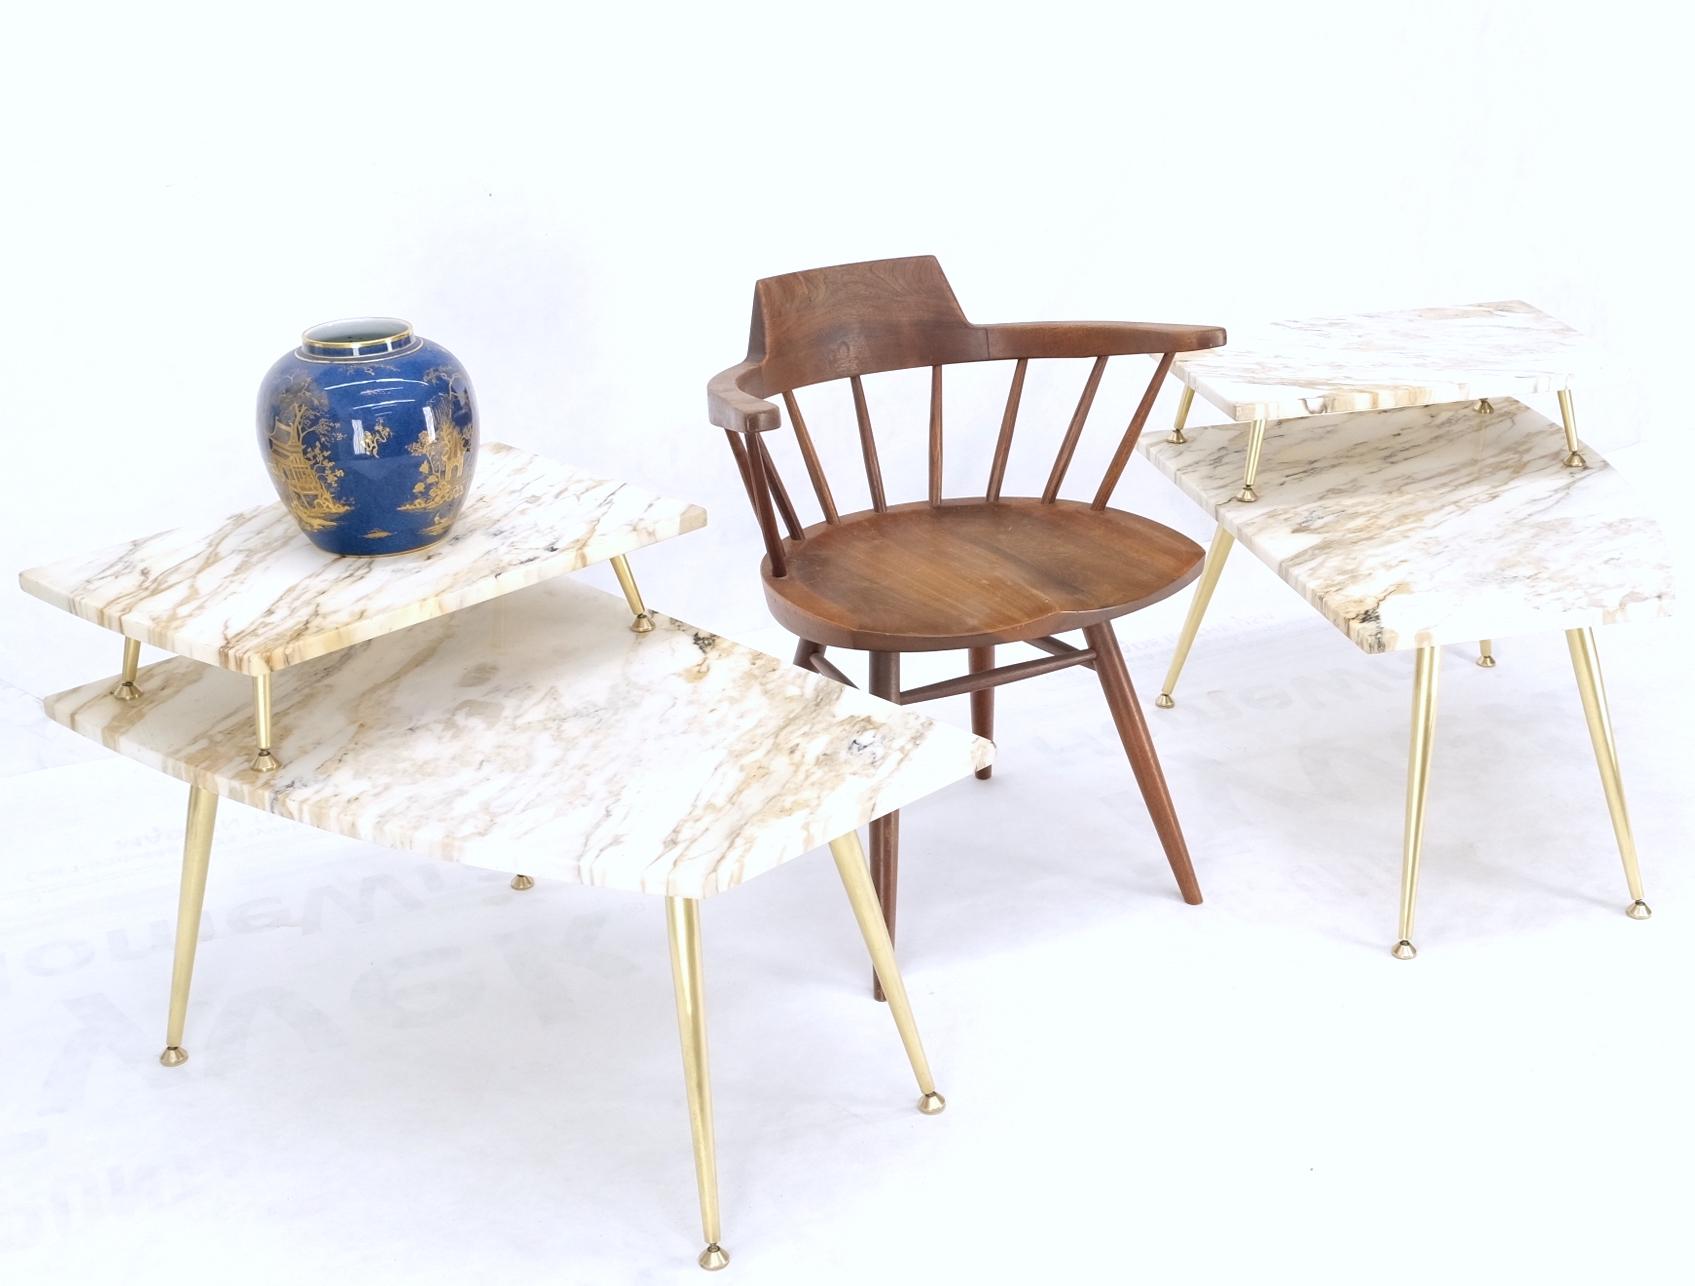 Pair of Asymmetrical Wedge Two Tier Marble Top Tapered Brass Legs Side End Tables.
Base measures 16''H with step measure to 21'' full height.